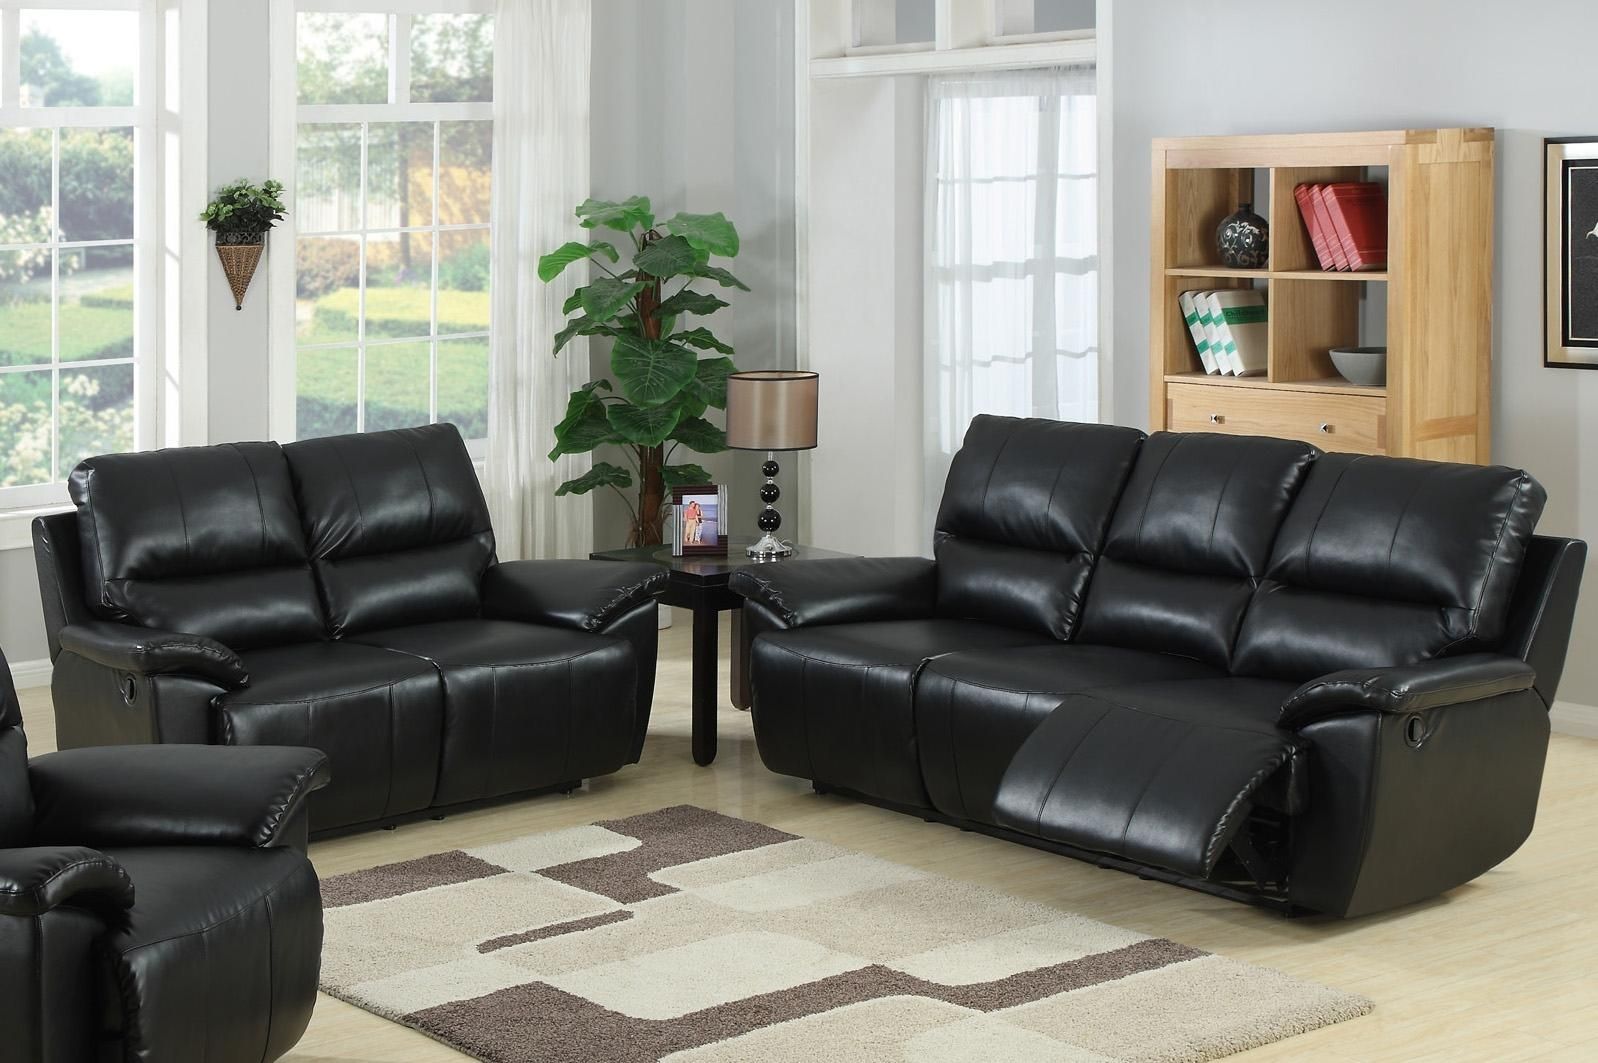 High Quality Black Leather Sofas At Cheap Prices Leather Sofa Throughout Sofas Cheap Prices (View 8 of 20)